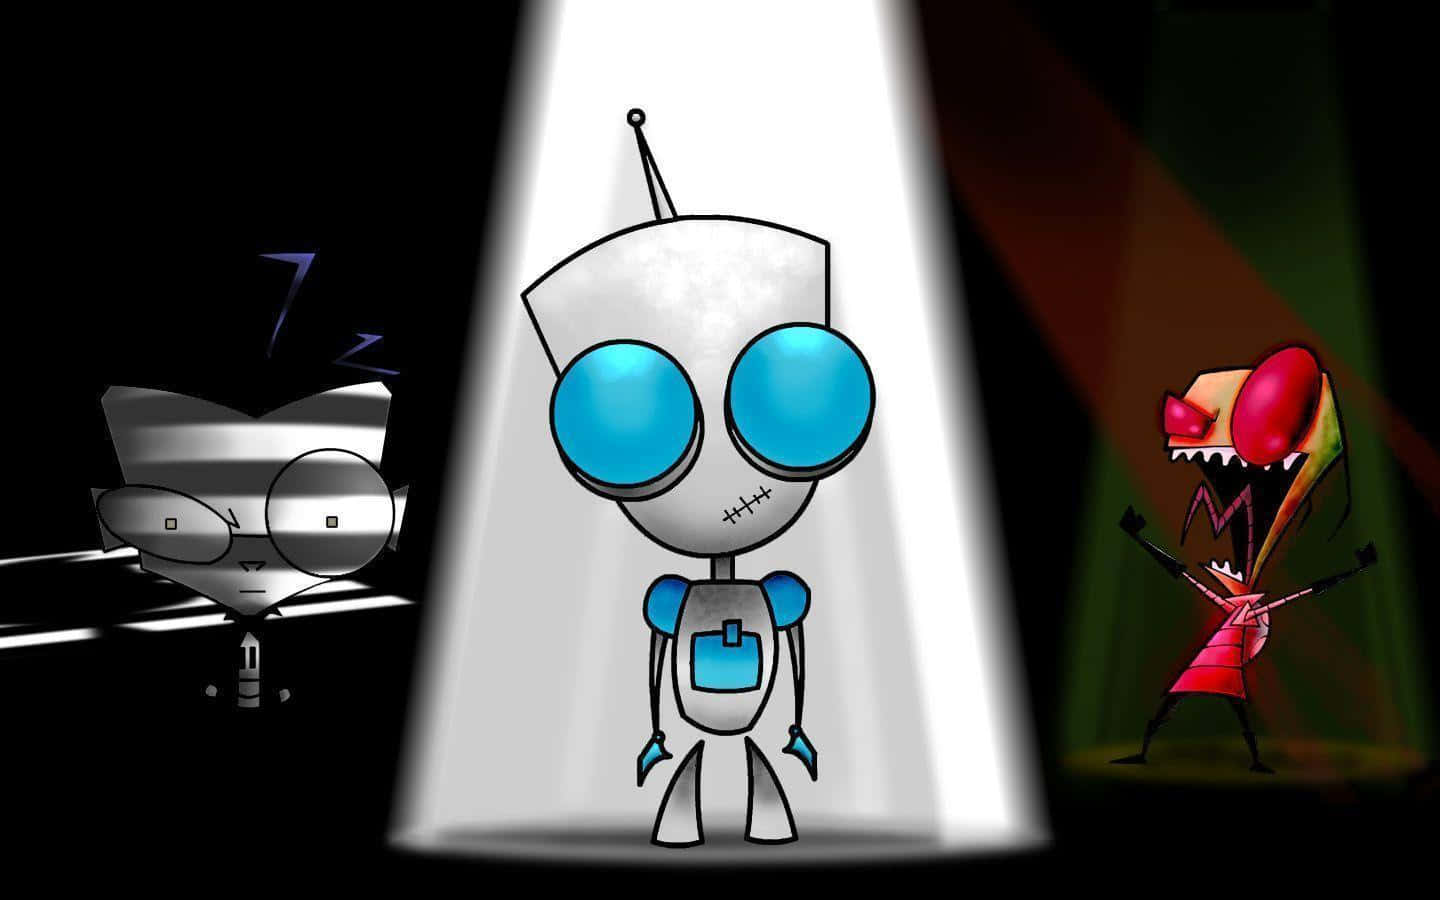 Invader Zim Takes Over Earth!